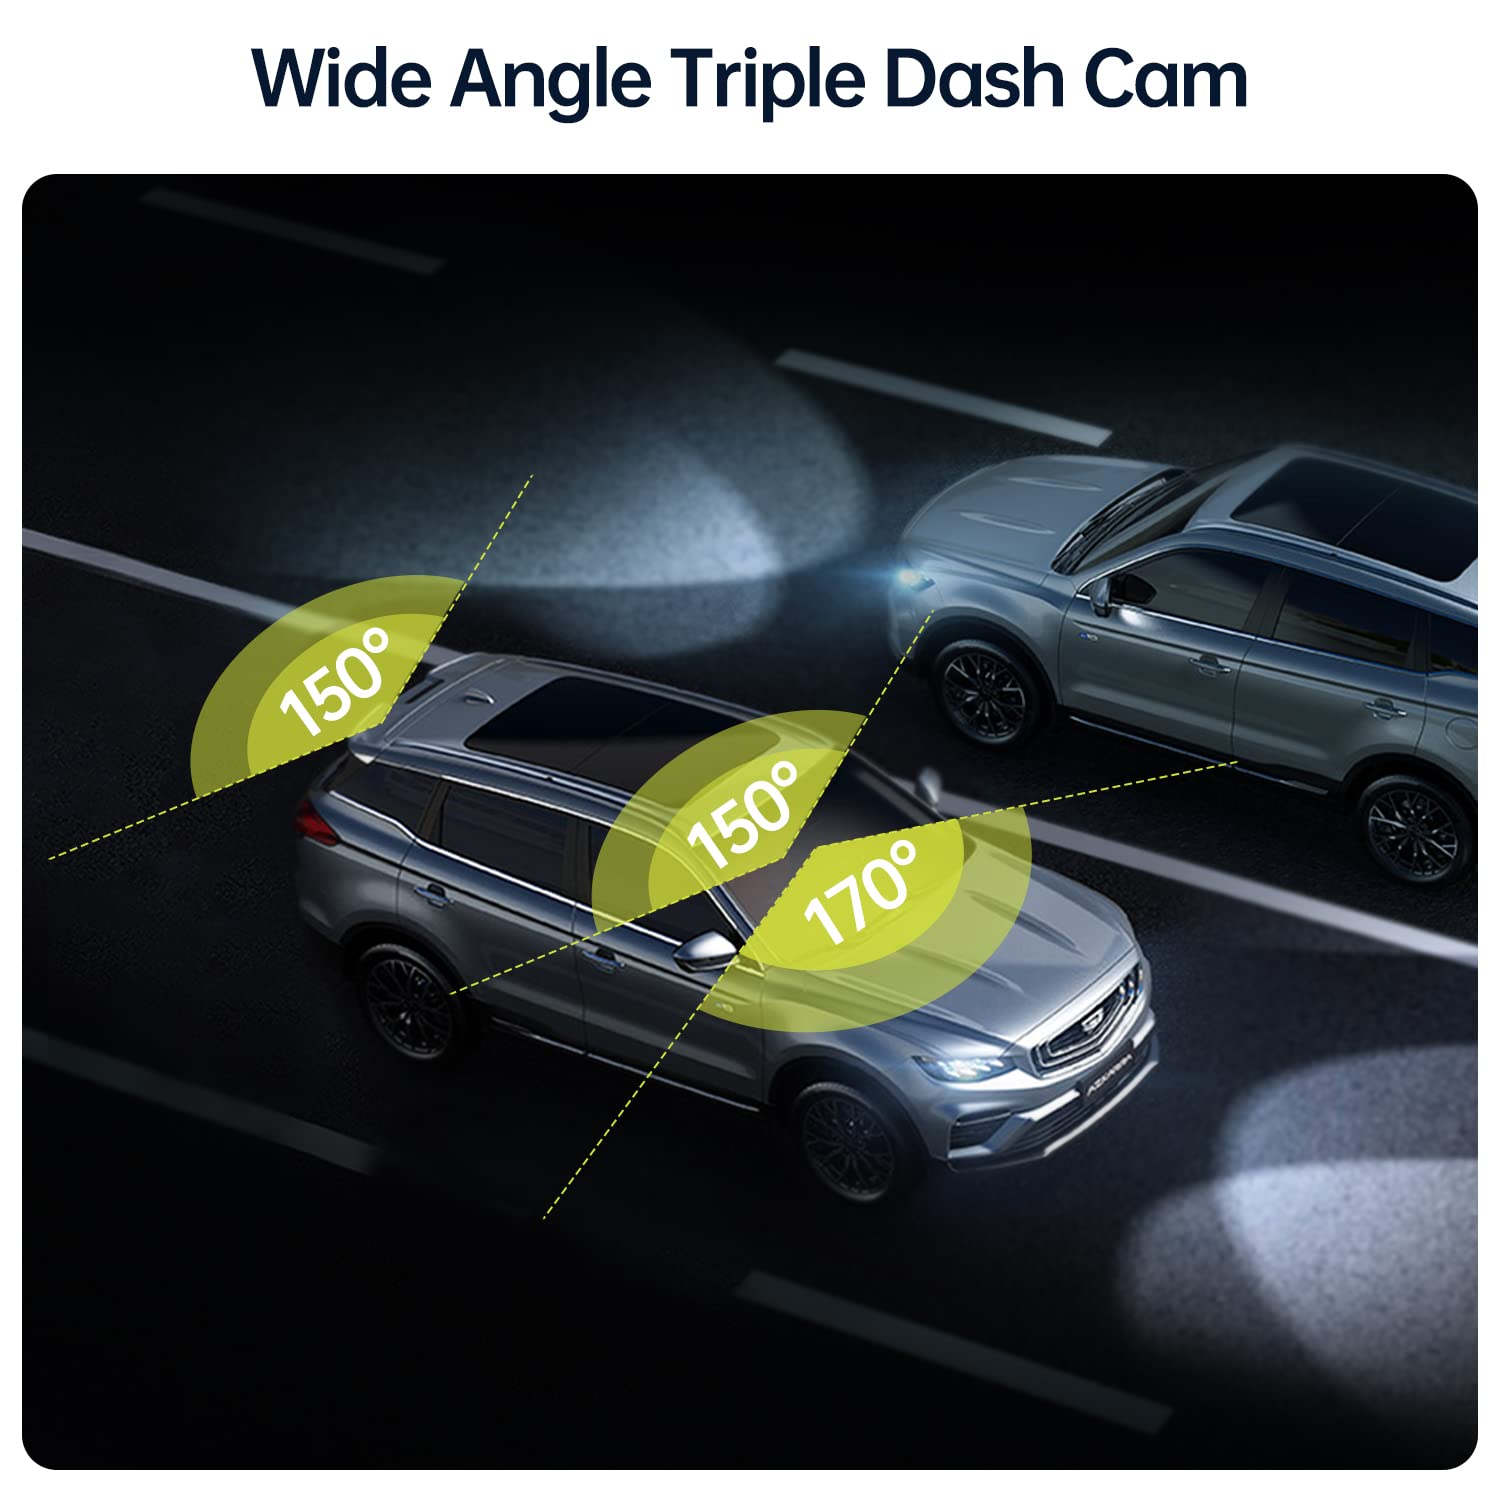 3 Channel Dash Cam Front and Rear Inside, 1080P Dash Camera for Cars with 64GB U3 SD Card, Dashcam Three Way Triple Car Camera with IR Night Vision, Parking Monitor, WDR